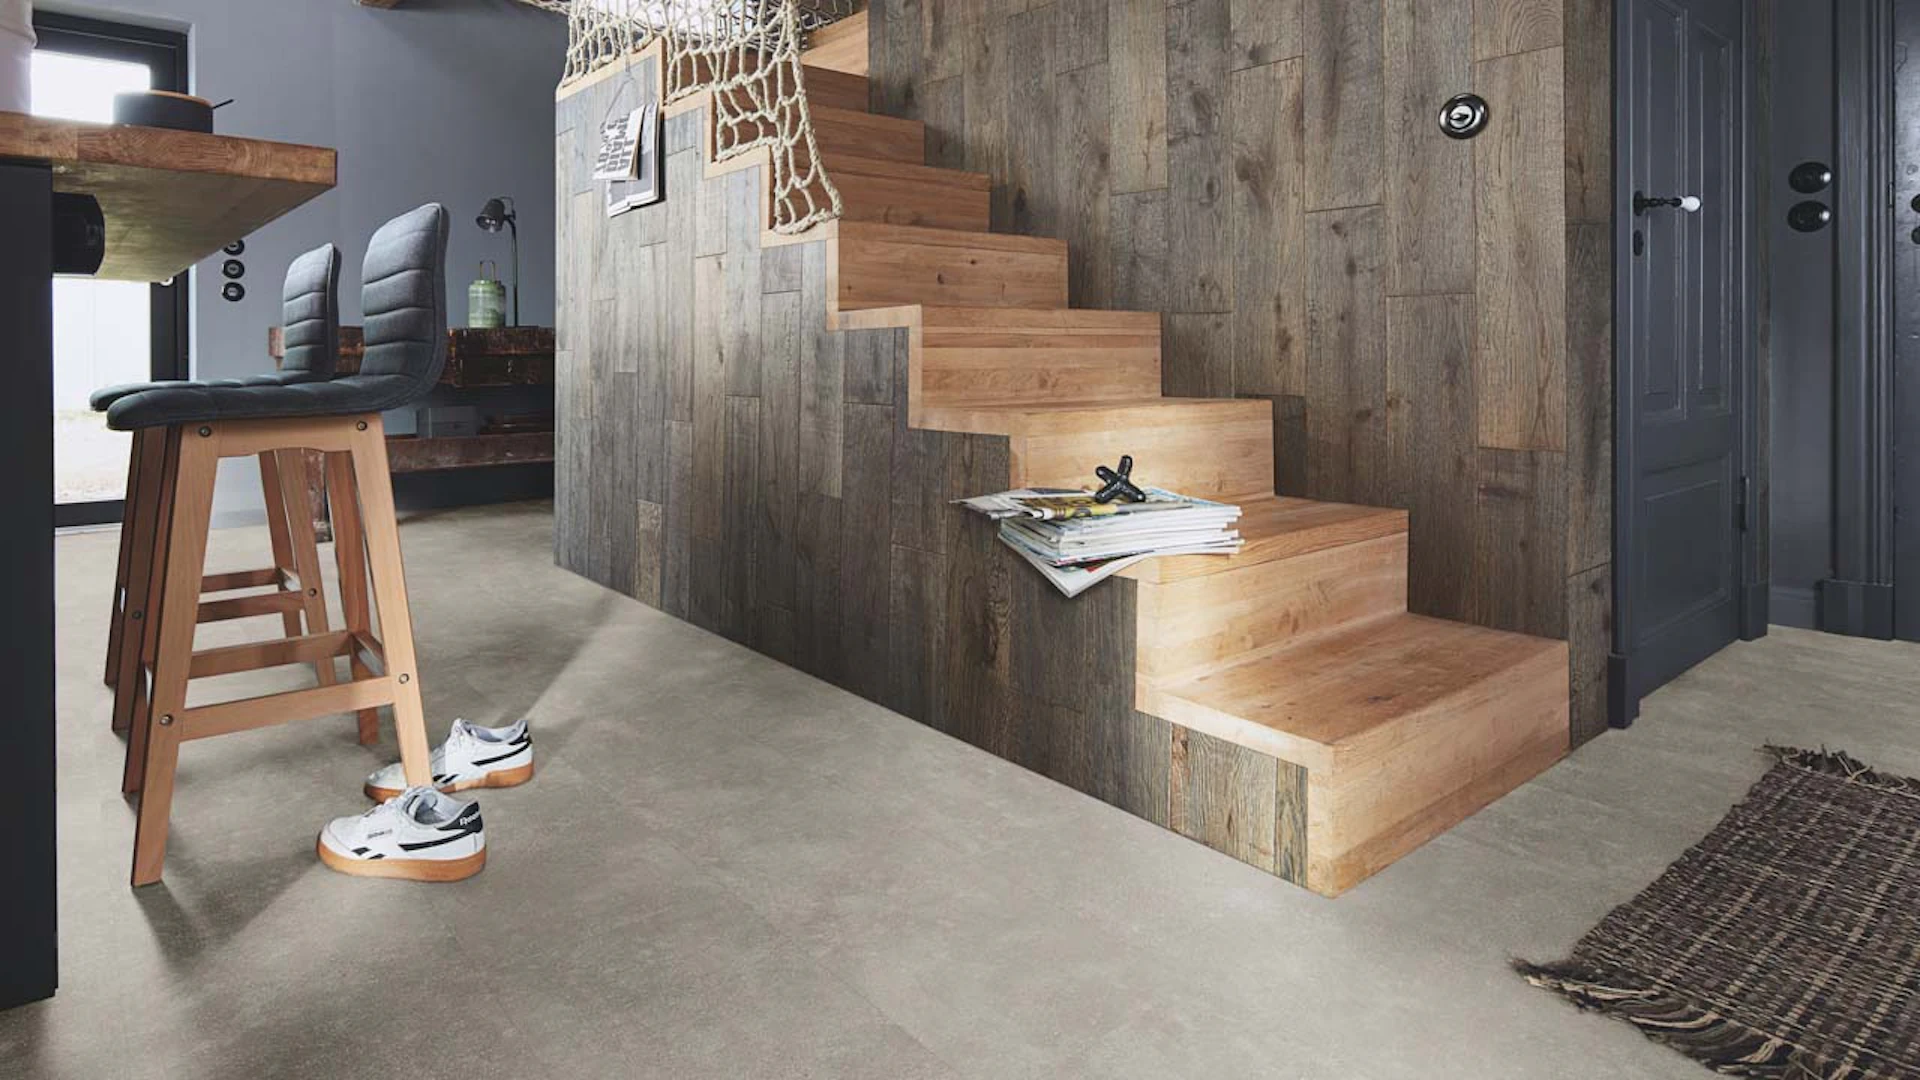 MEISTER Laminato - MeisterDesign LB 150 Pietra Minerale 07137 | Made in Germany (600003-0857398-07137)